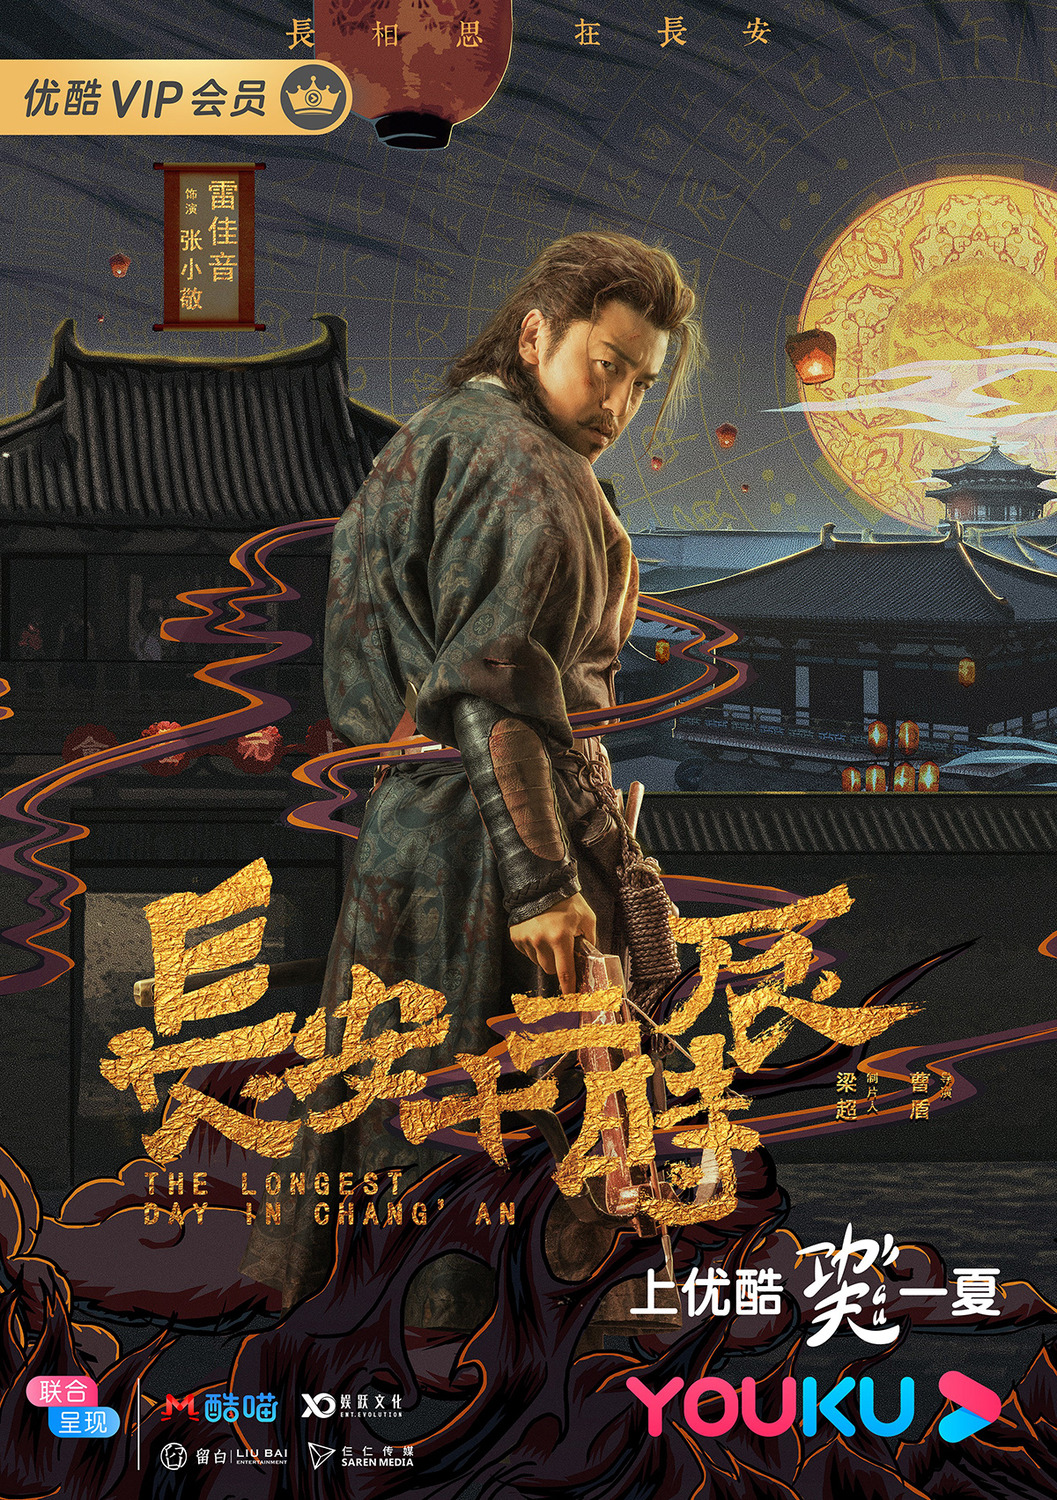 Extra Large TV Poster Image for Chang'an shi er shi chen (#9 of 18)